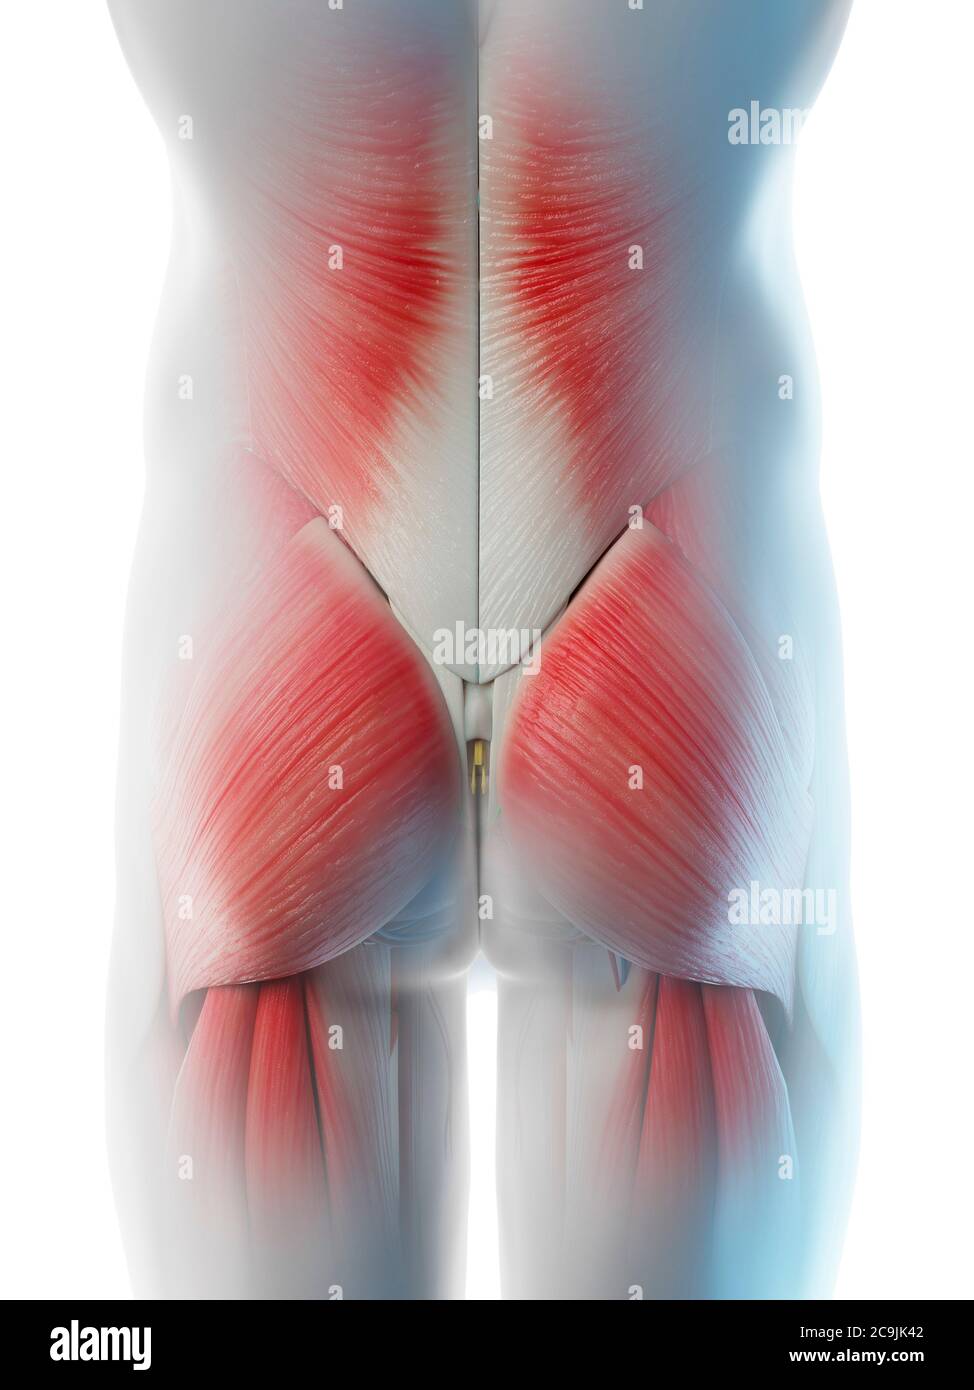 Male hip muscles, computer illustration. Stock Photo